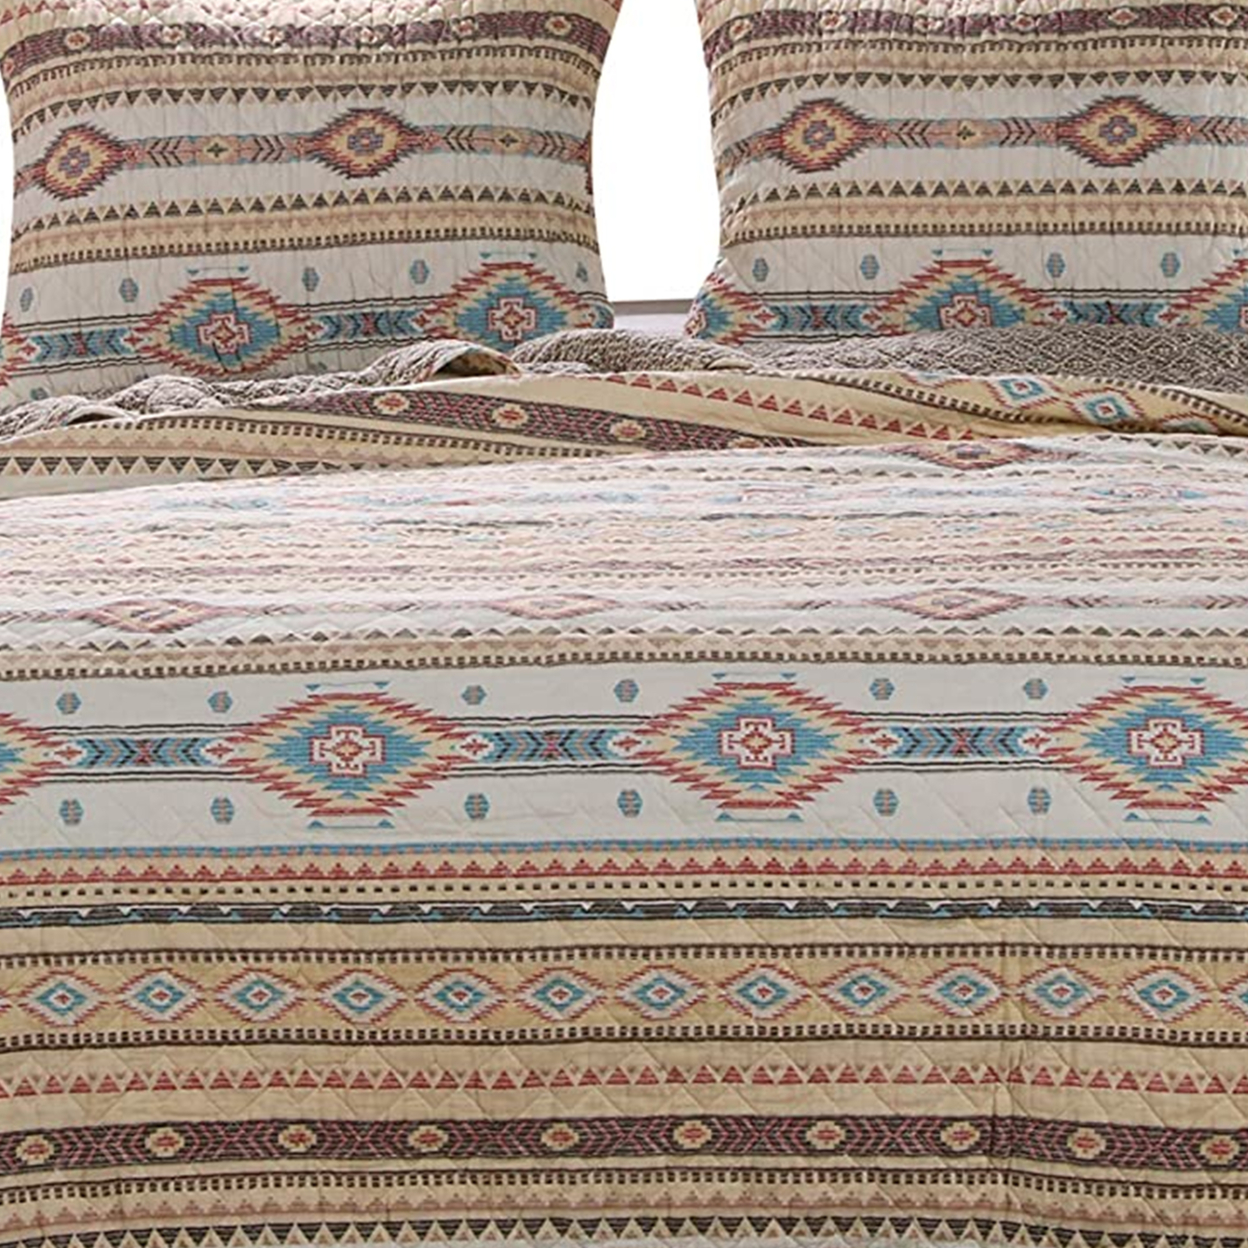 Full Size 3 Piece Polyester Quilt Set With Kilim Pattern, Multicolor- Saltoro Sherpi